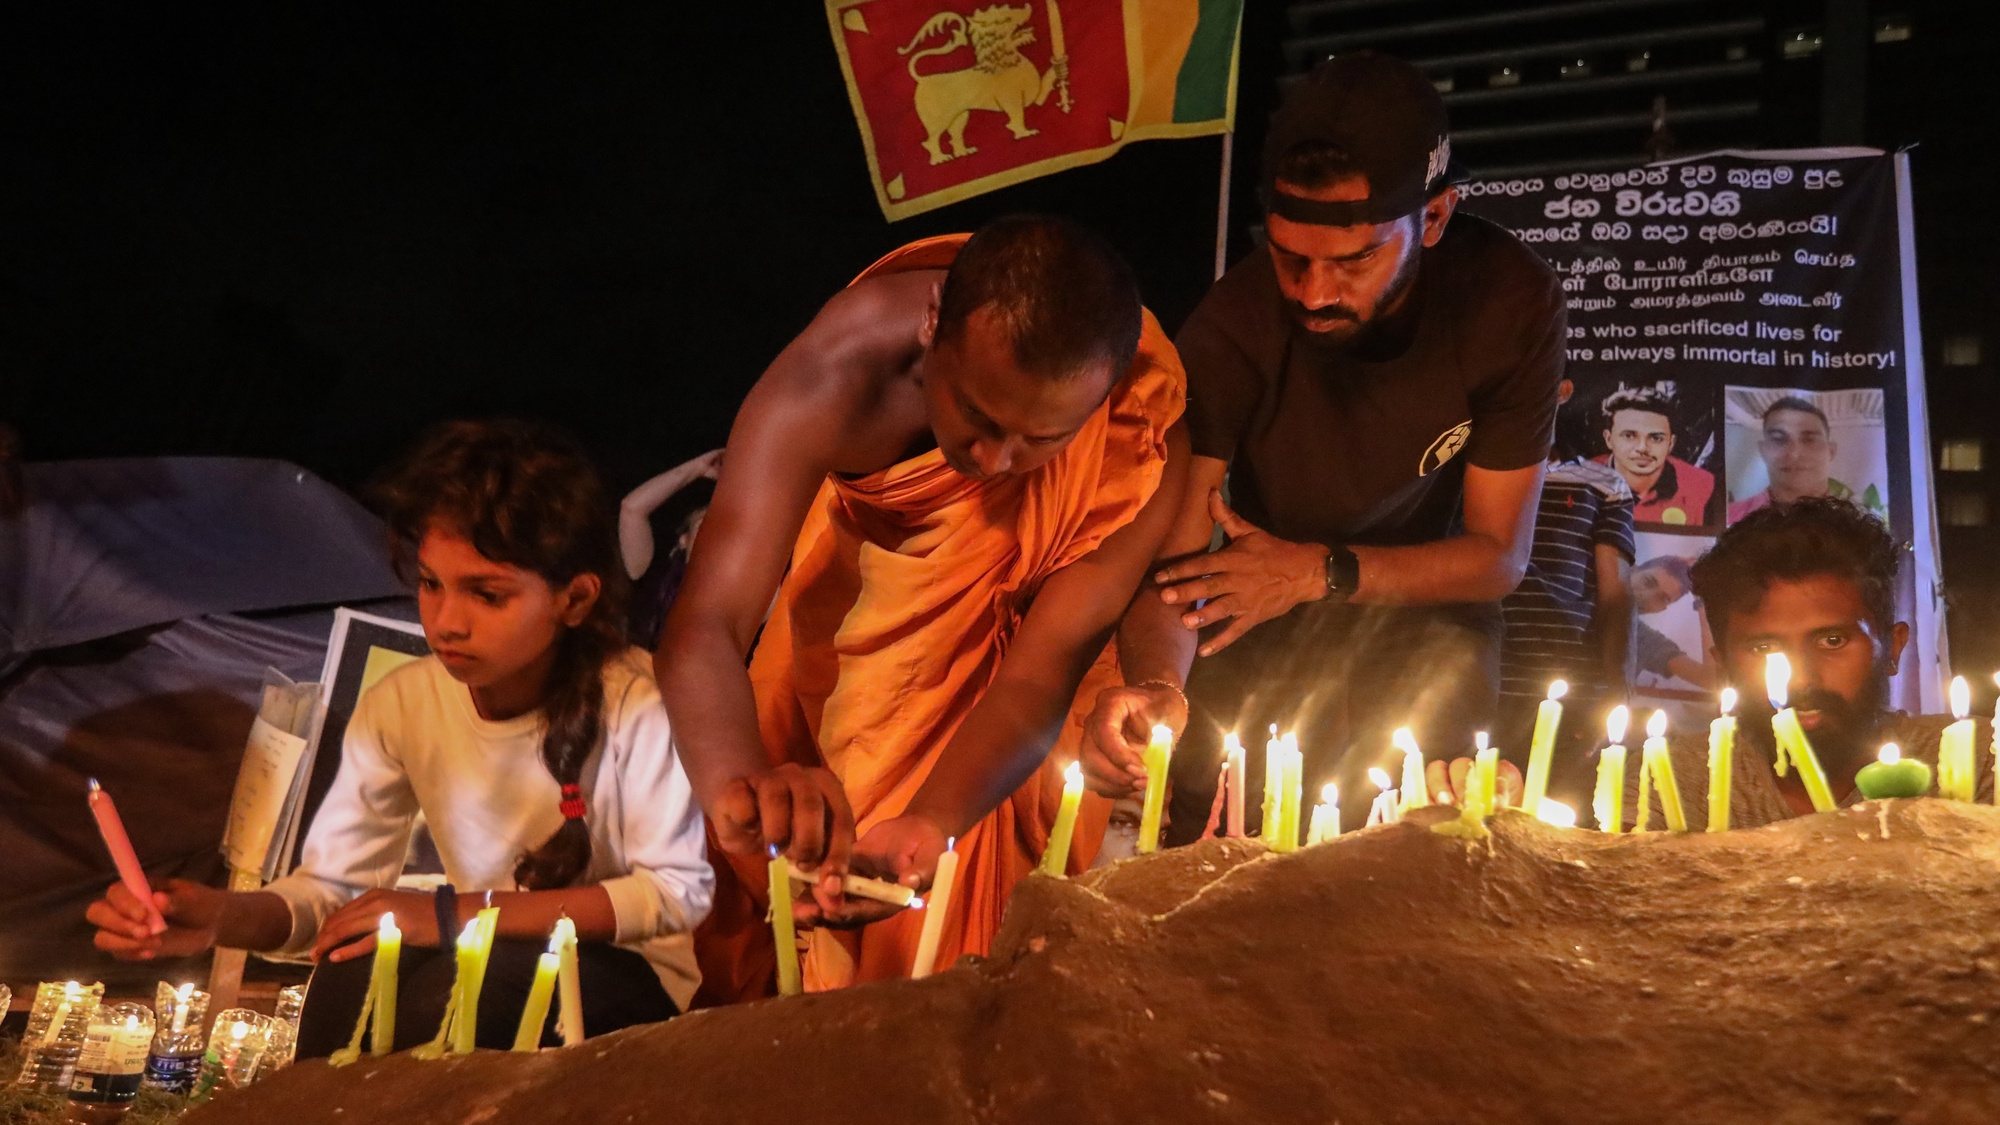 epa10074757 People light candles in memory of the protesters who were allegedly killed or wounded during the months-long protests and clashes against the economic crisis, near the Presidential Secretariat in Colombo, Sri Lanka, 16 July 2022. The Parliament of Sri Lanka accepted the resignation of President Gotabaya Rajapaksa after he fled to Singapore through the Maldives following months of anti-government protests fueled by the ongoing economic crisis. Protests have been rocking the country for over four months as Sri Lanka faces its worst-ever economic crisis in decades due to the lack of foreign reserves, resulting in severe shortages in food, fuel, medicine, and imported goods.  EPA/CHAMILA KARUNARATHNE